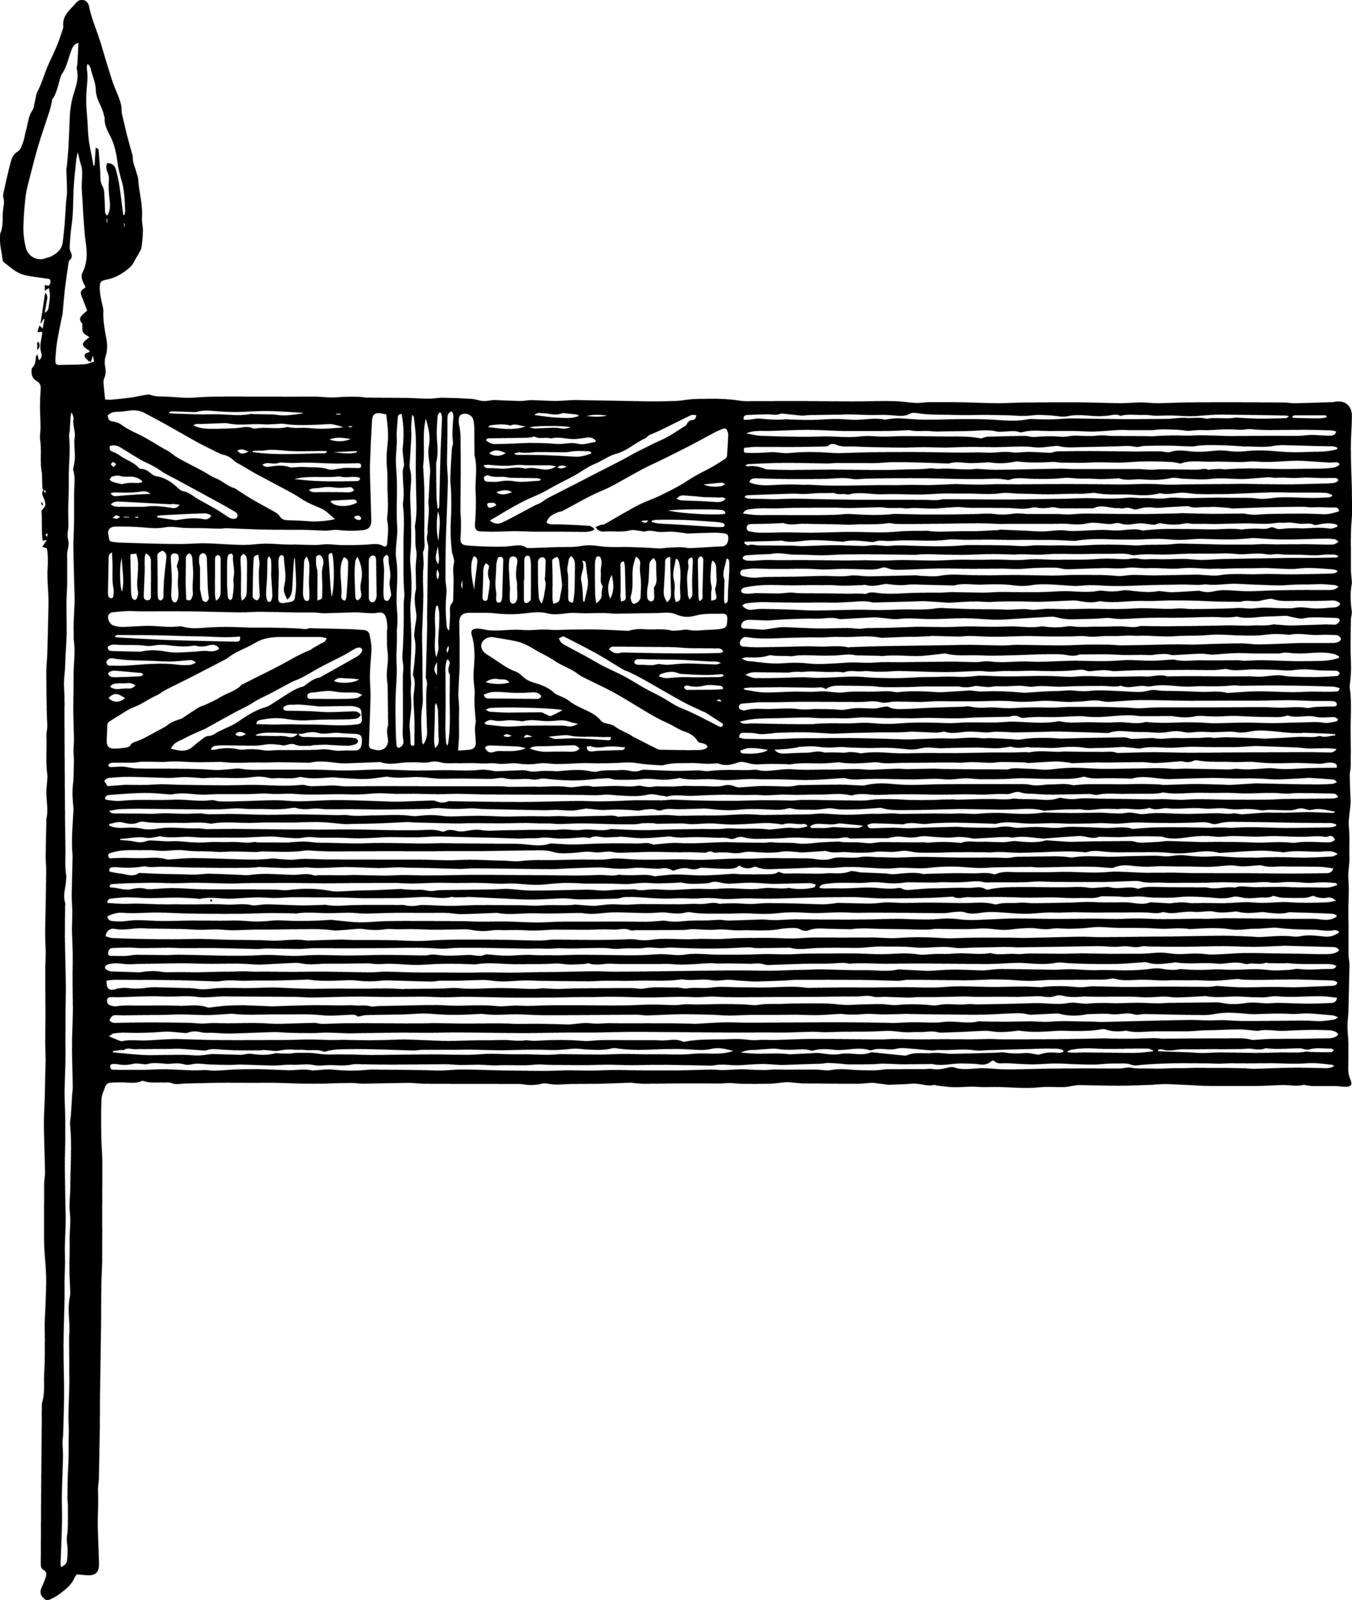 The Blue Ensign is a flag of Great Britain, vintage illustration by Morphart